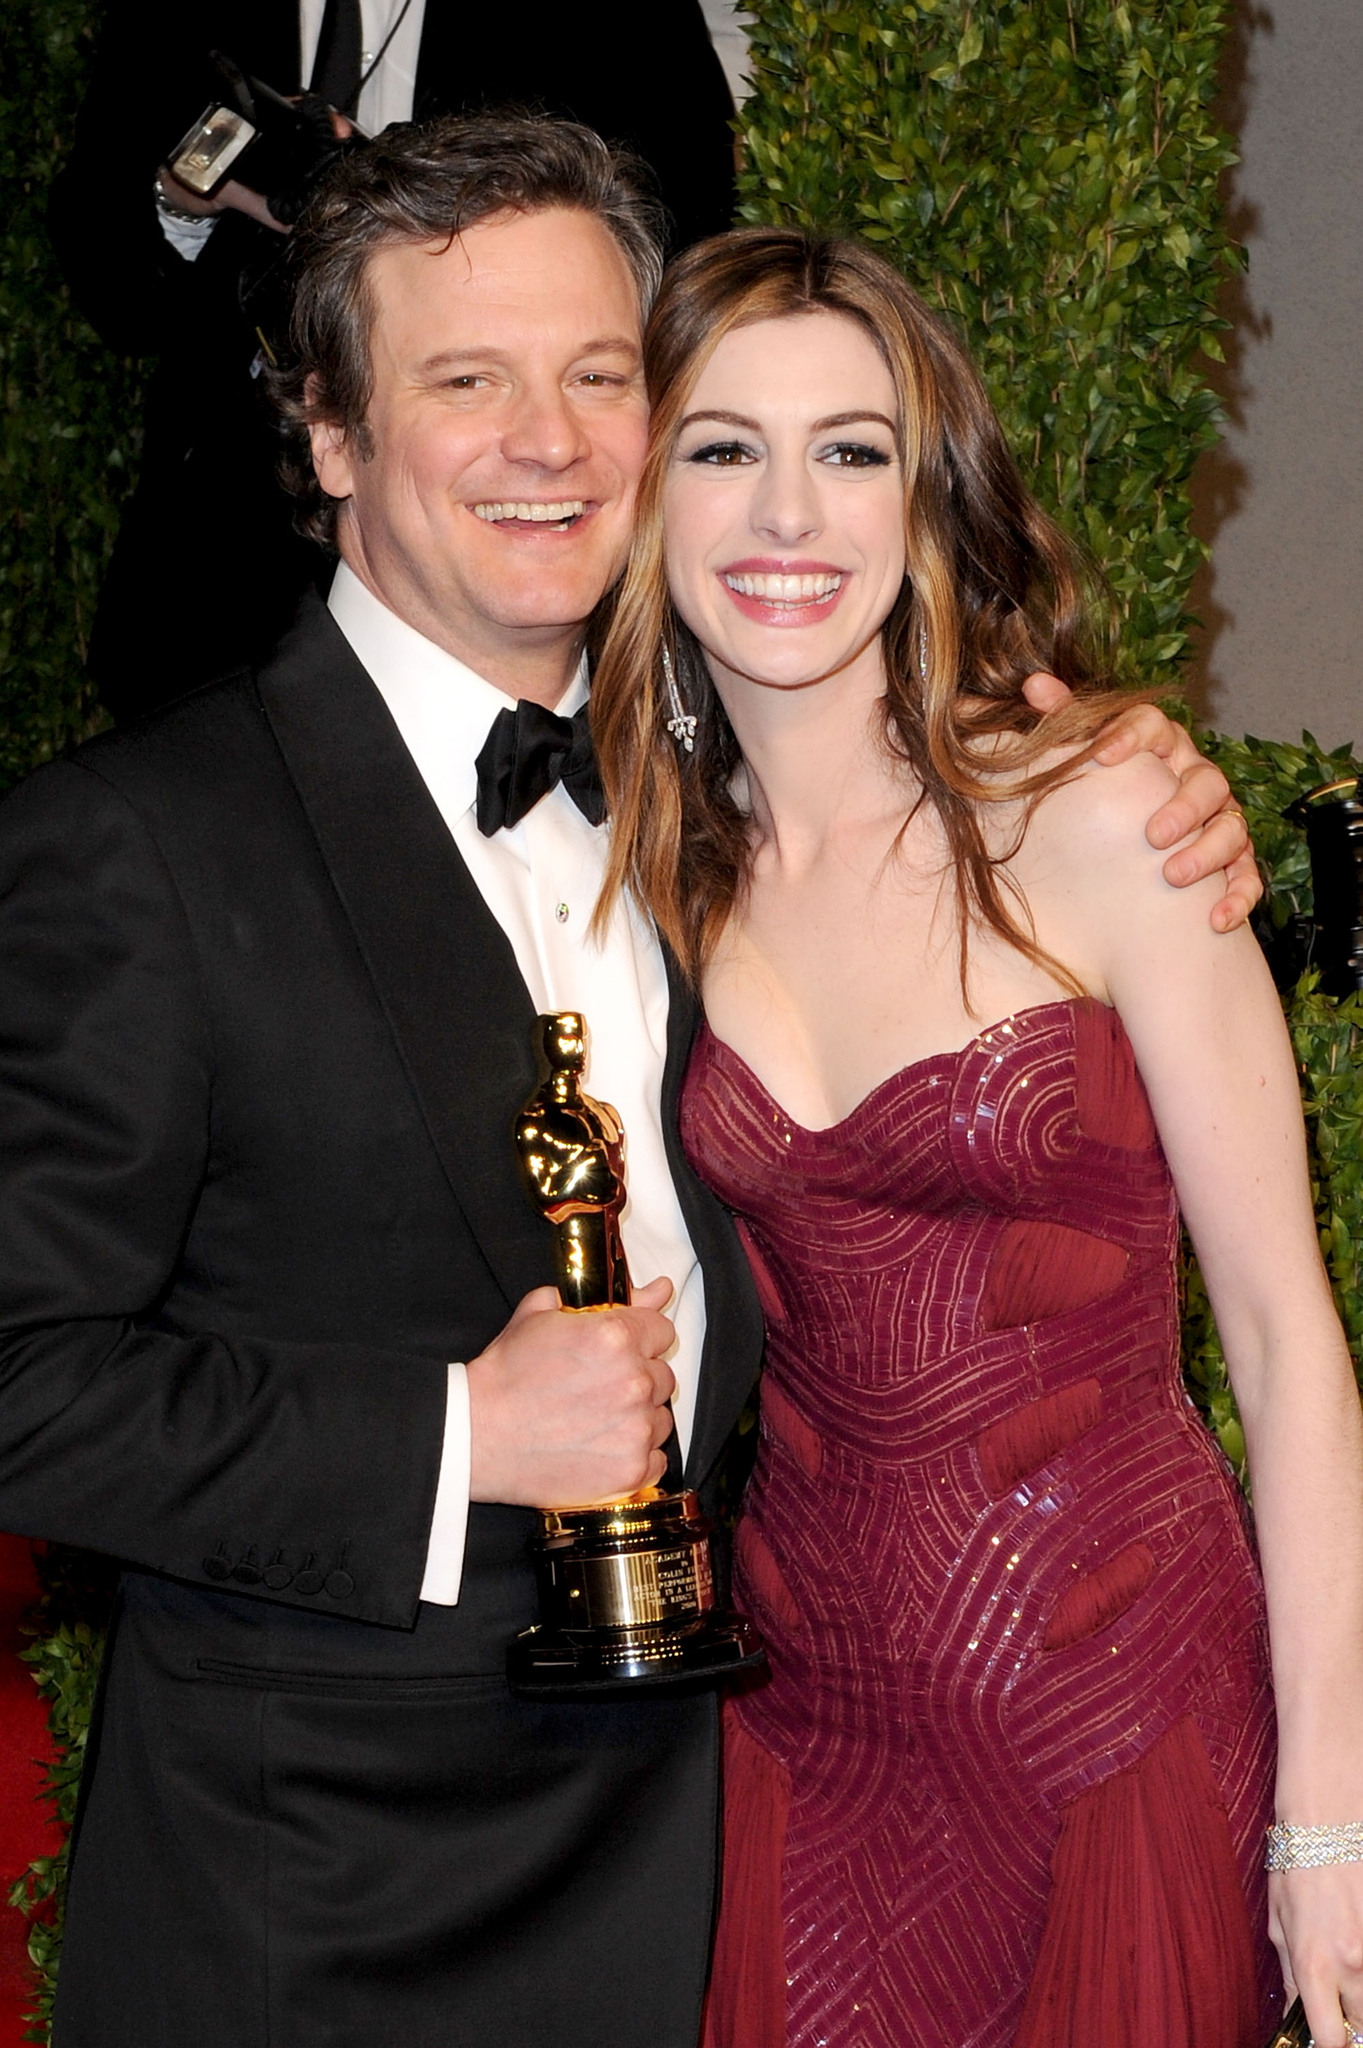 Colin Firth and Anne Hathaway